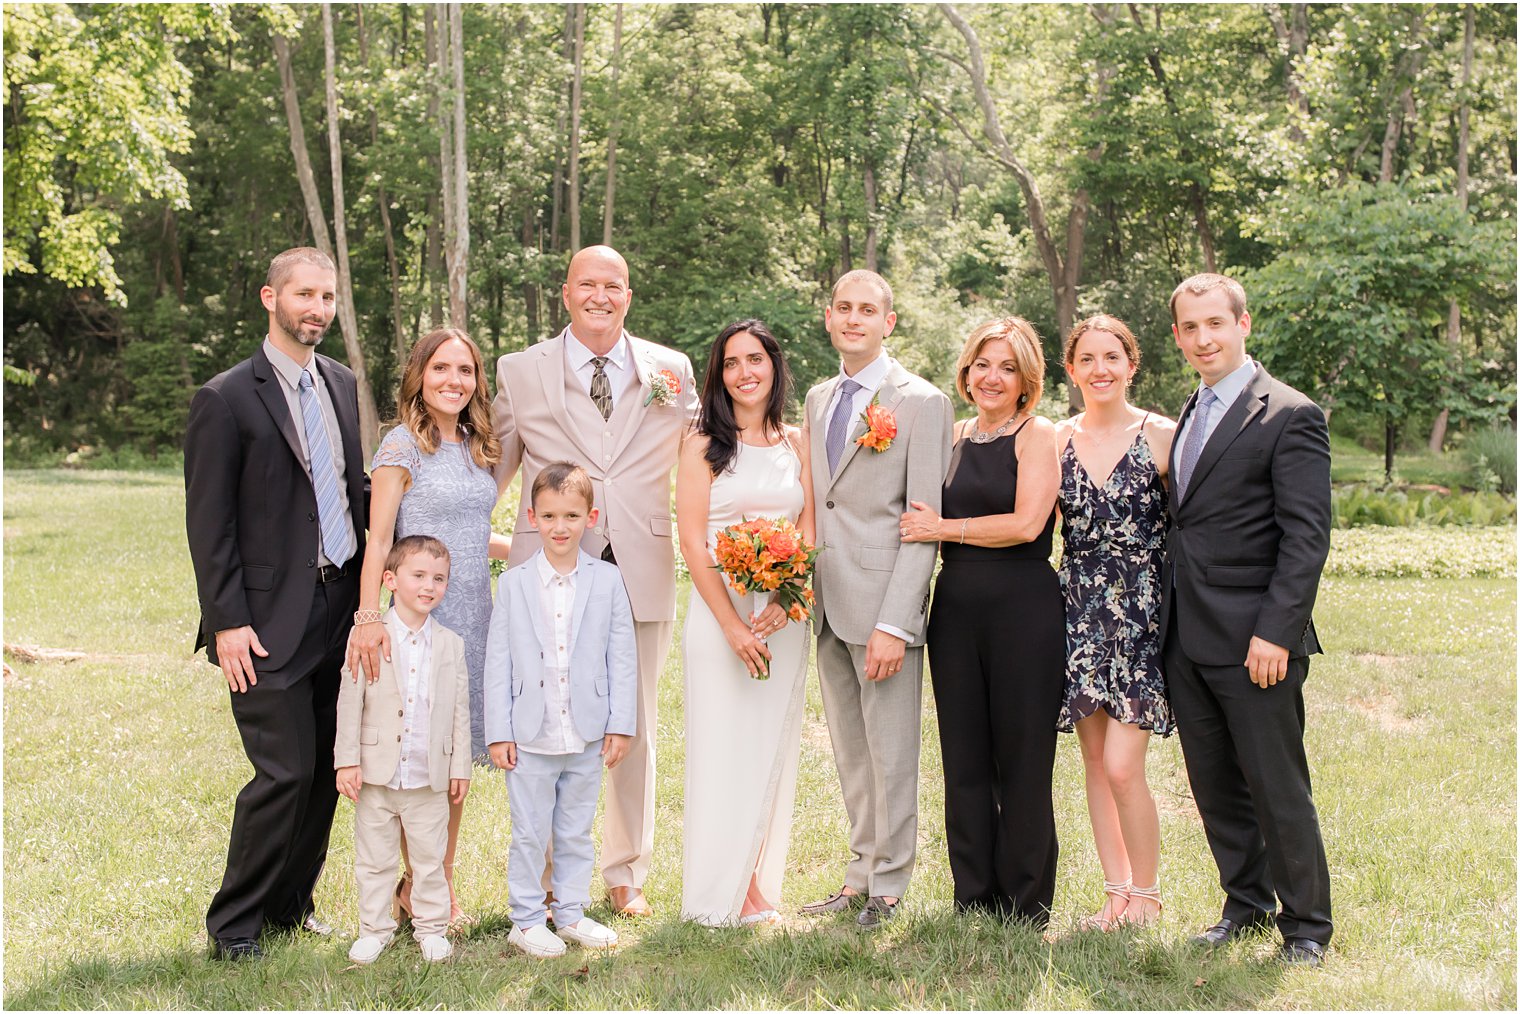 Family photo during intimate wedding